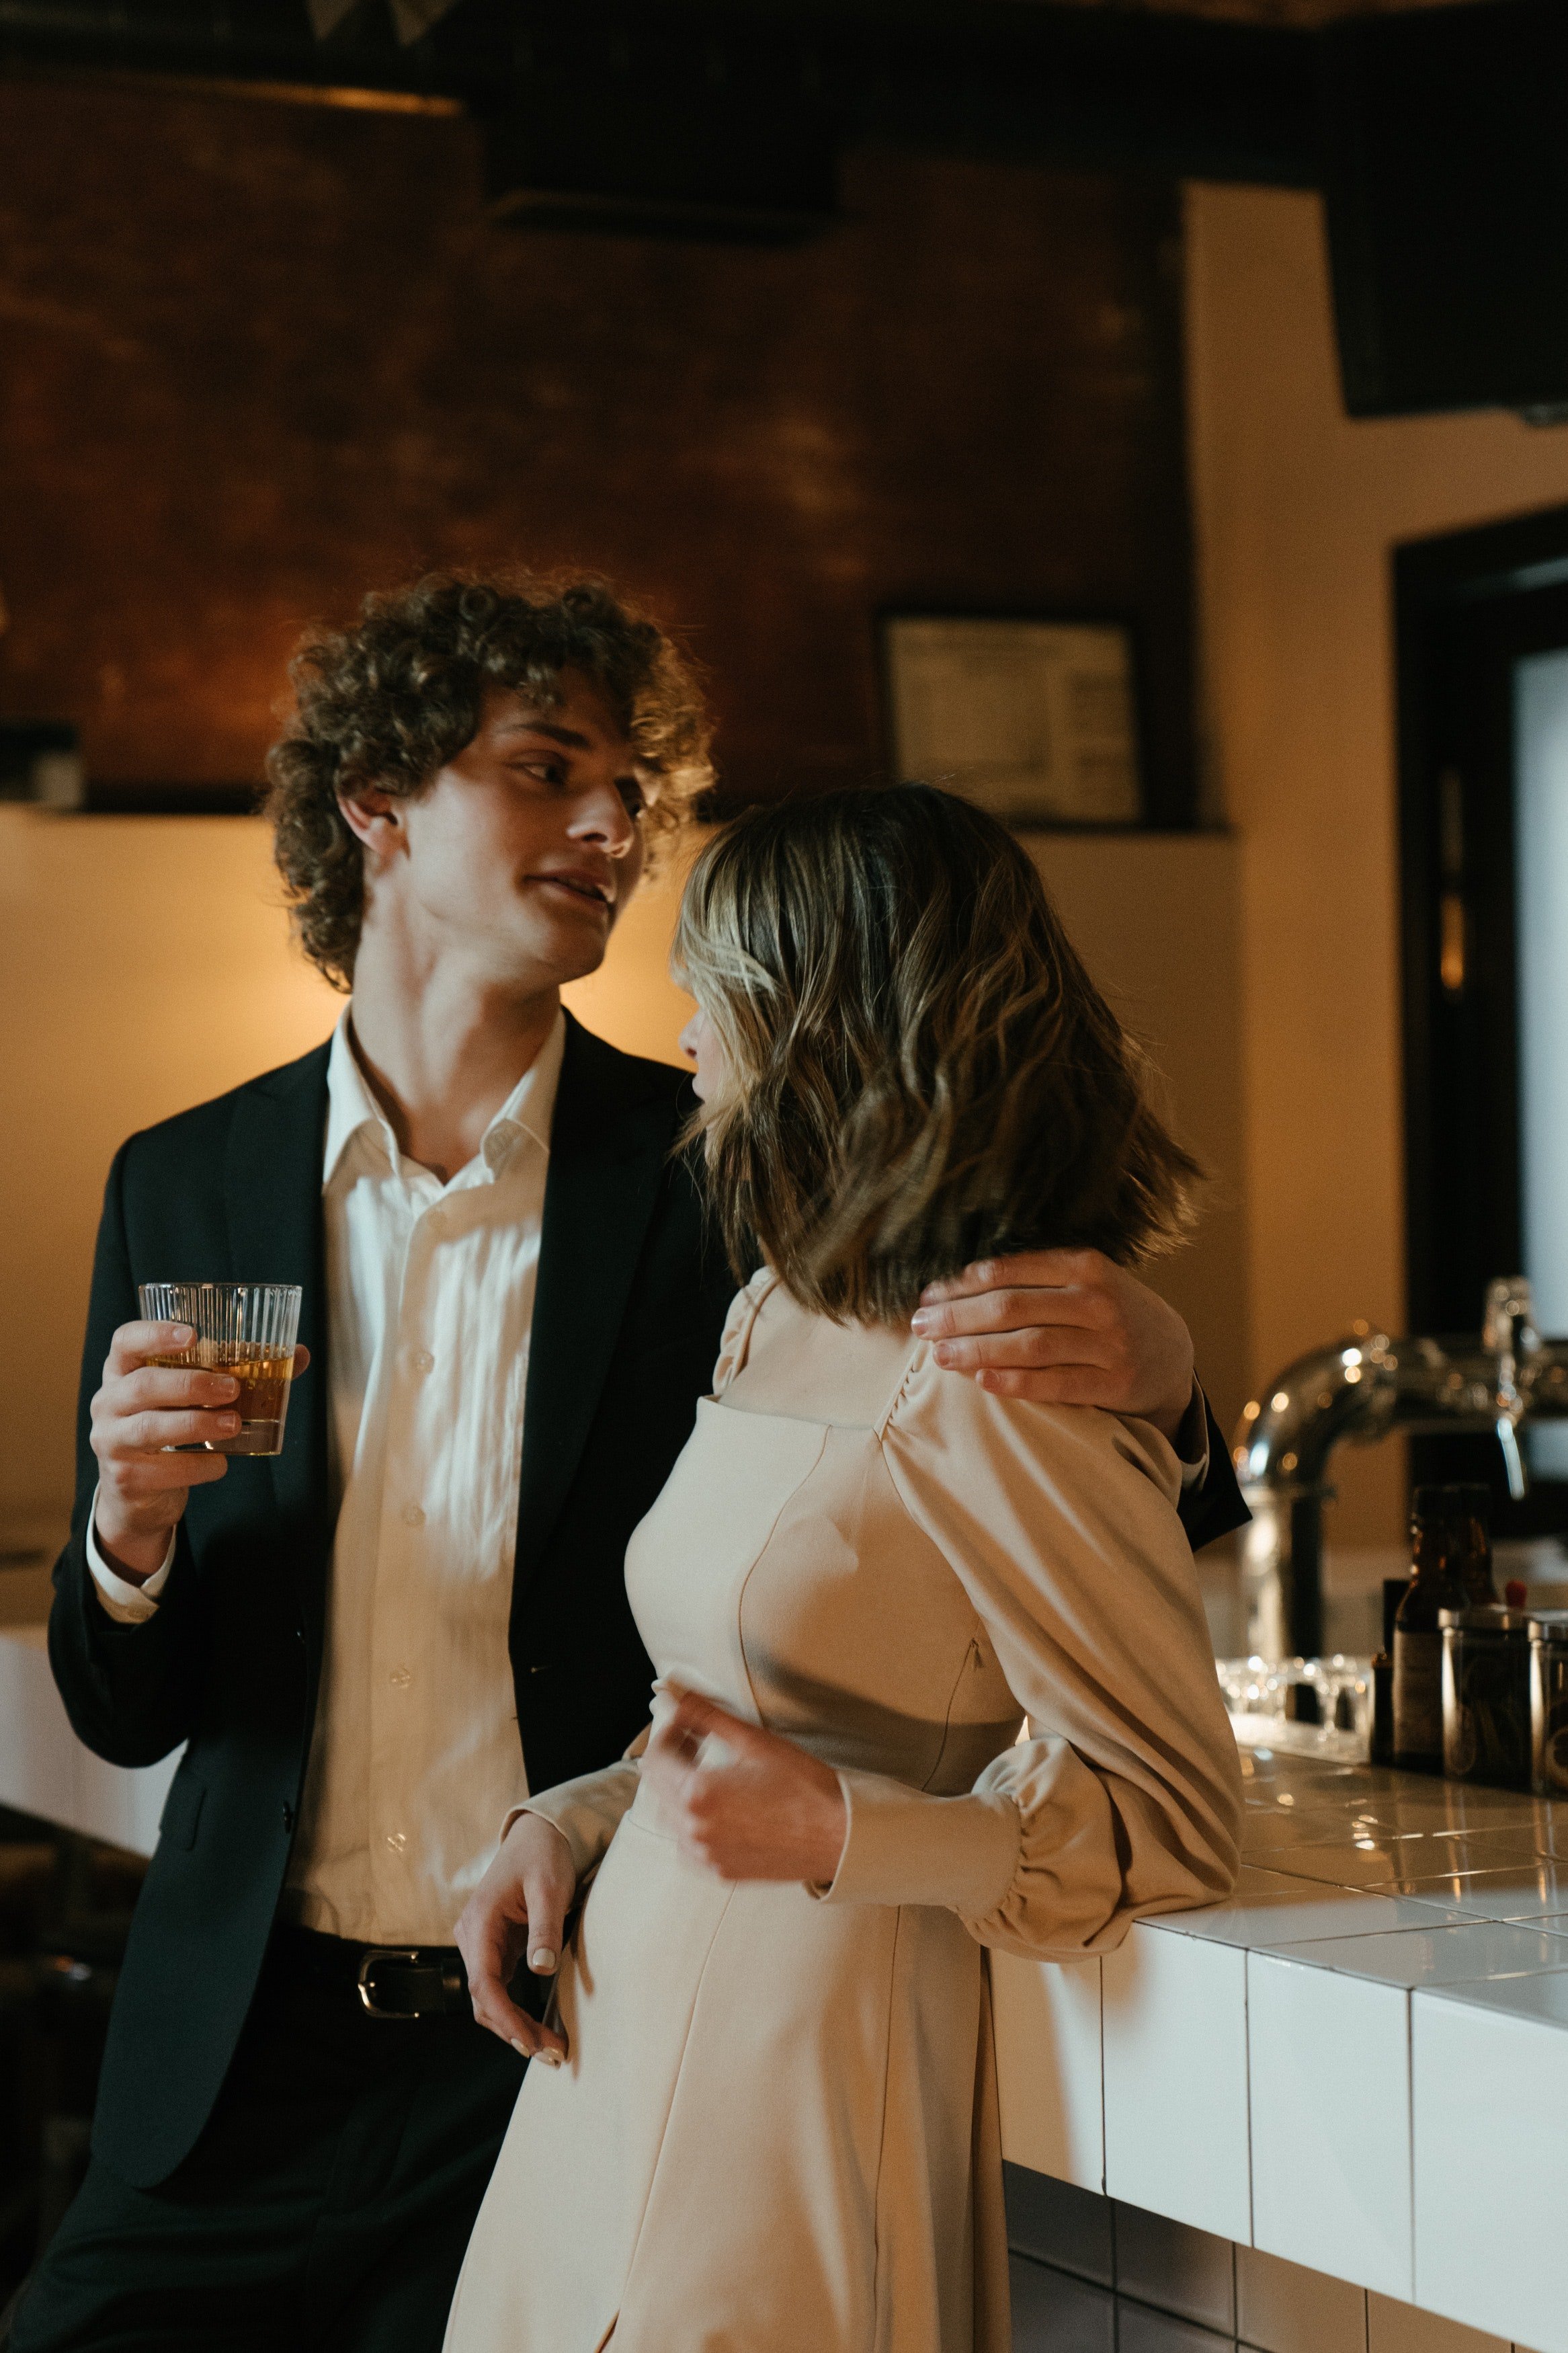 A woman and man talking in a bar. | Photo: Pexels/cottonbro